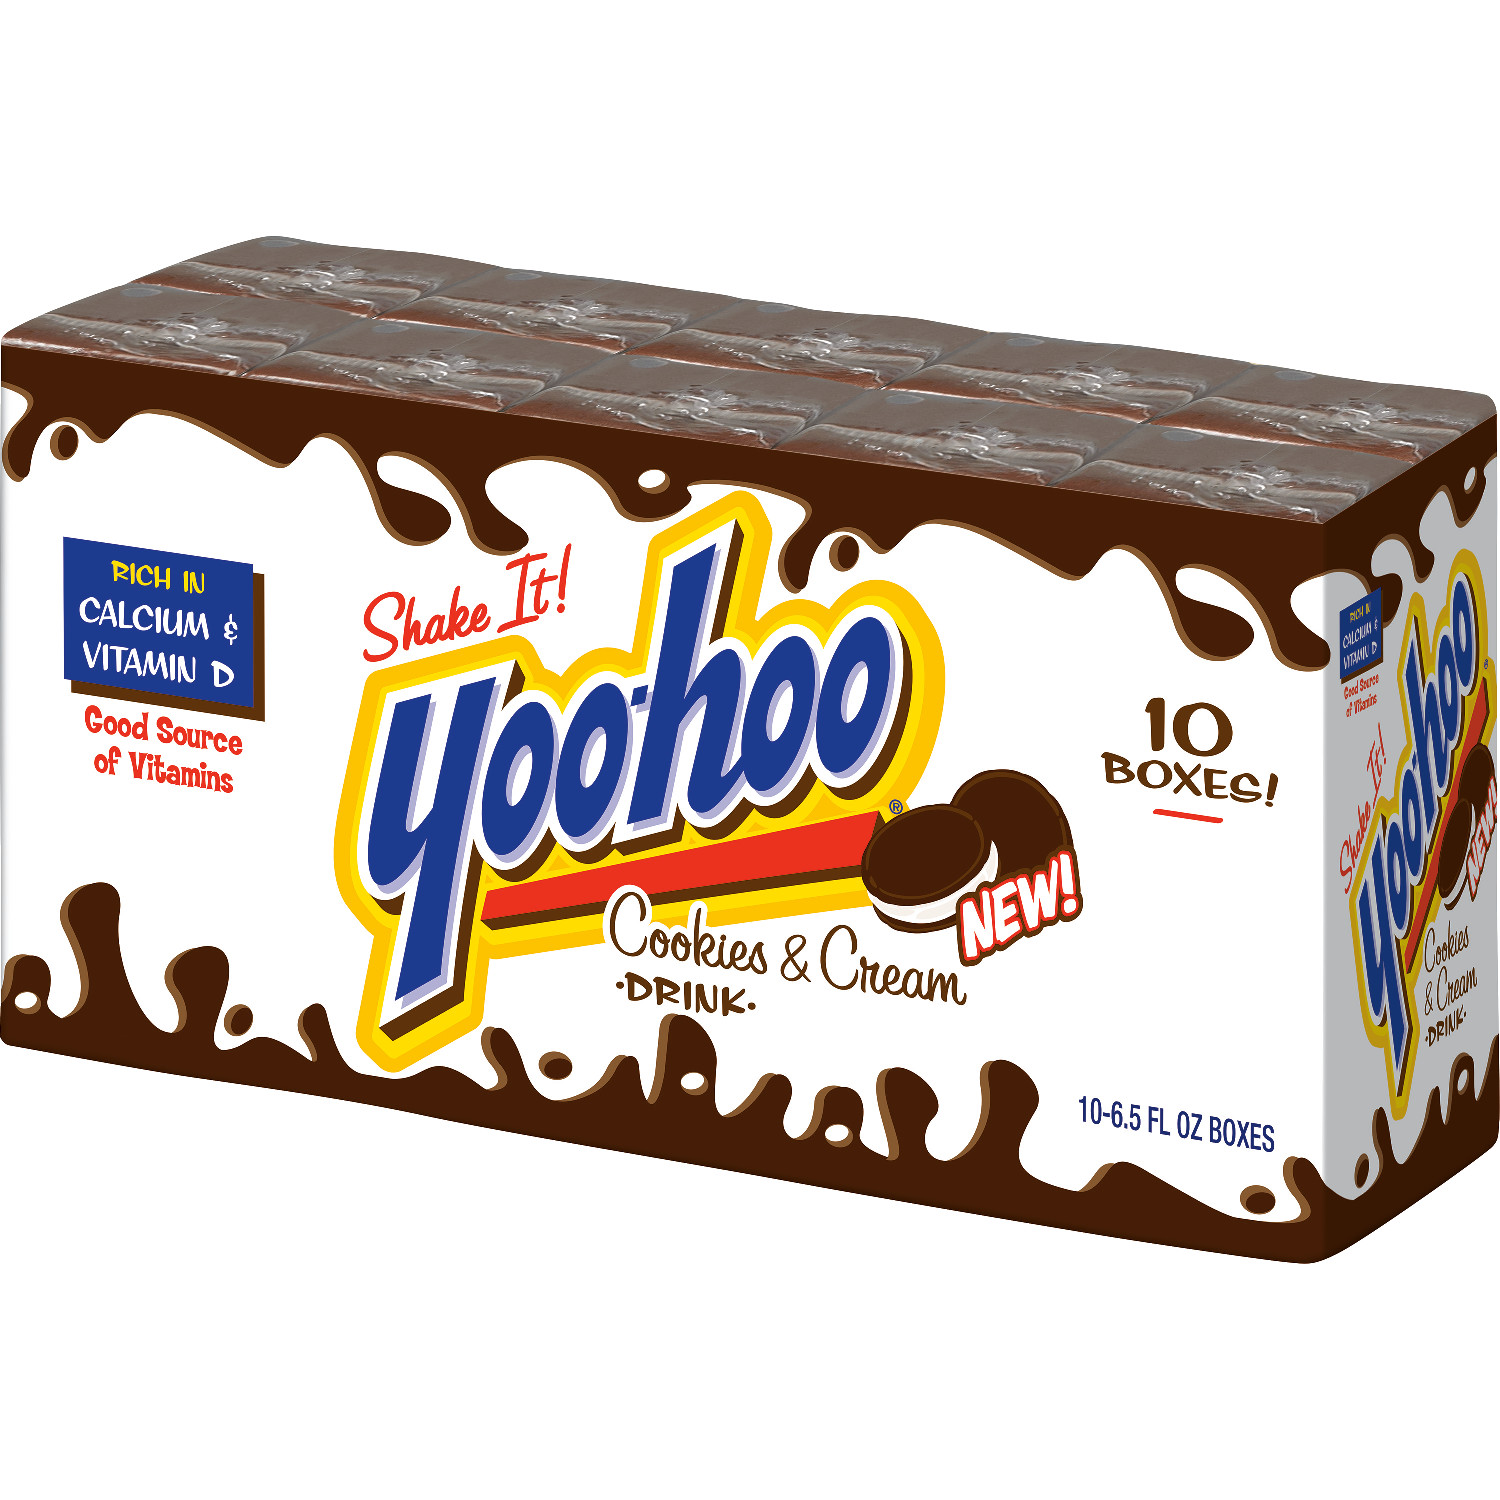 Yoo-hoo Cookies and Cream Drink, 6.5 Fl Oz Boxes, 10 Count (Pack of 4) - image 4 of 10